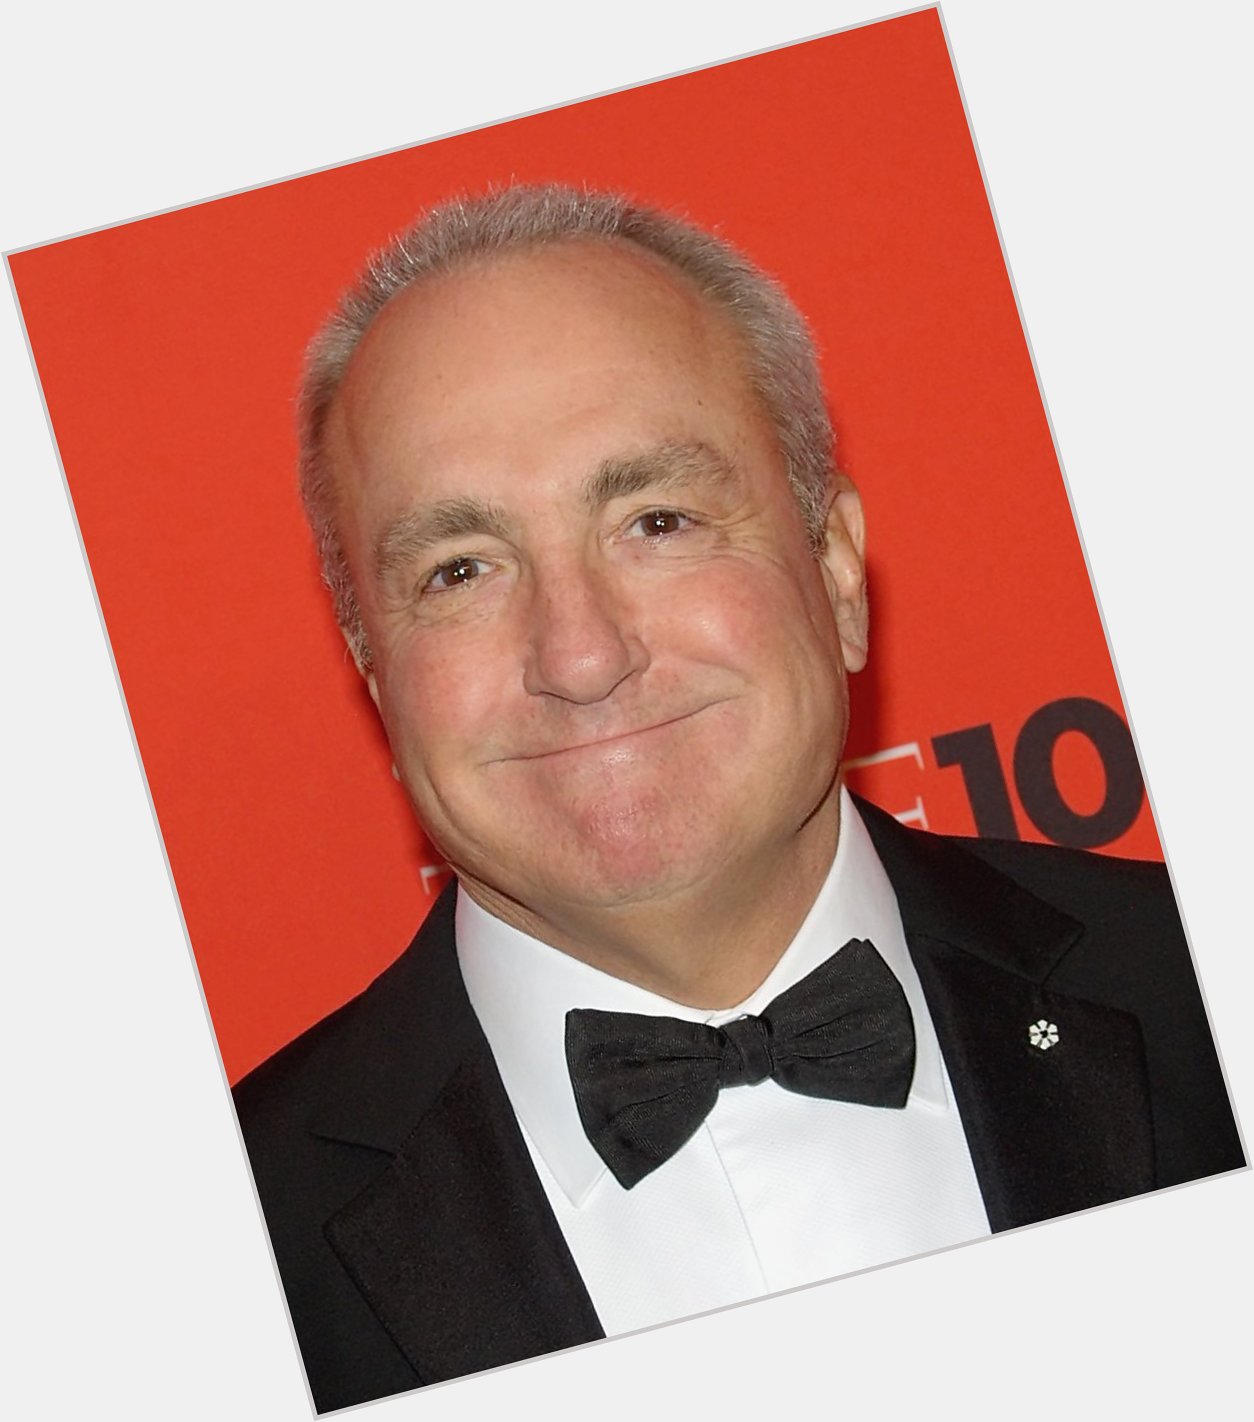  on with wishes Lorne Michaels a happy birthday! 